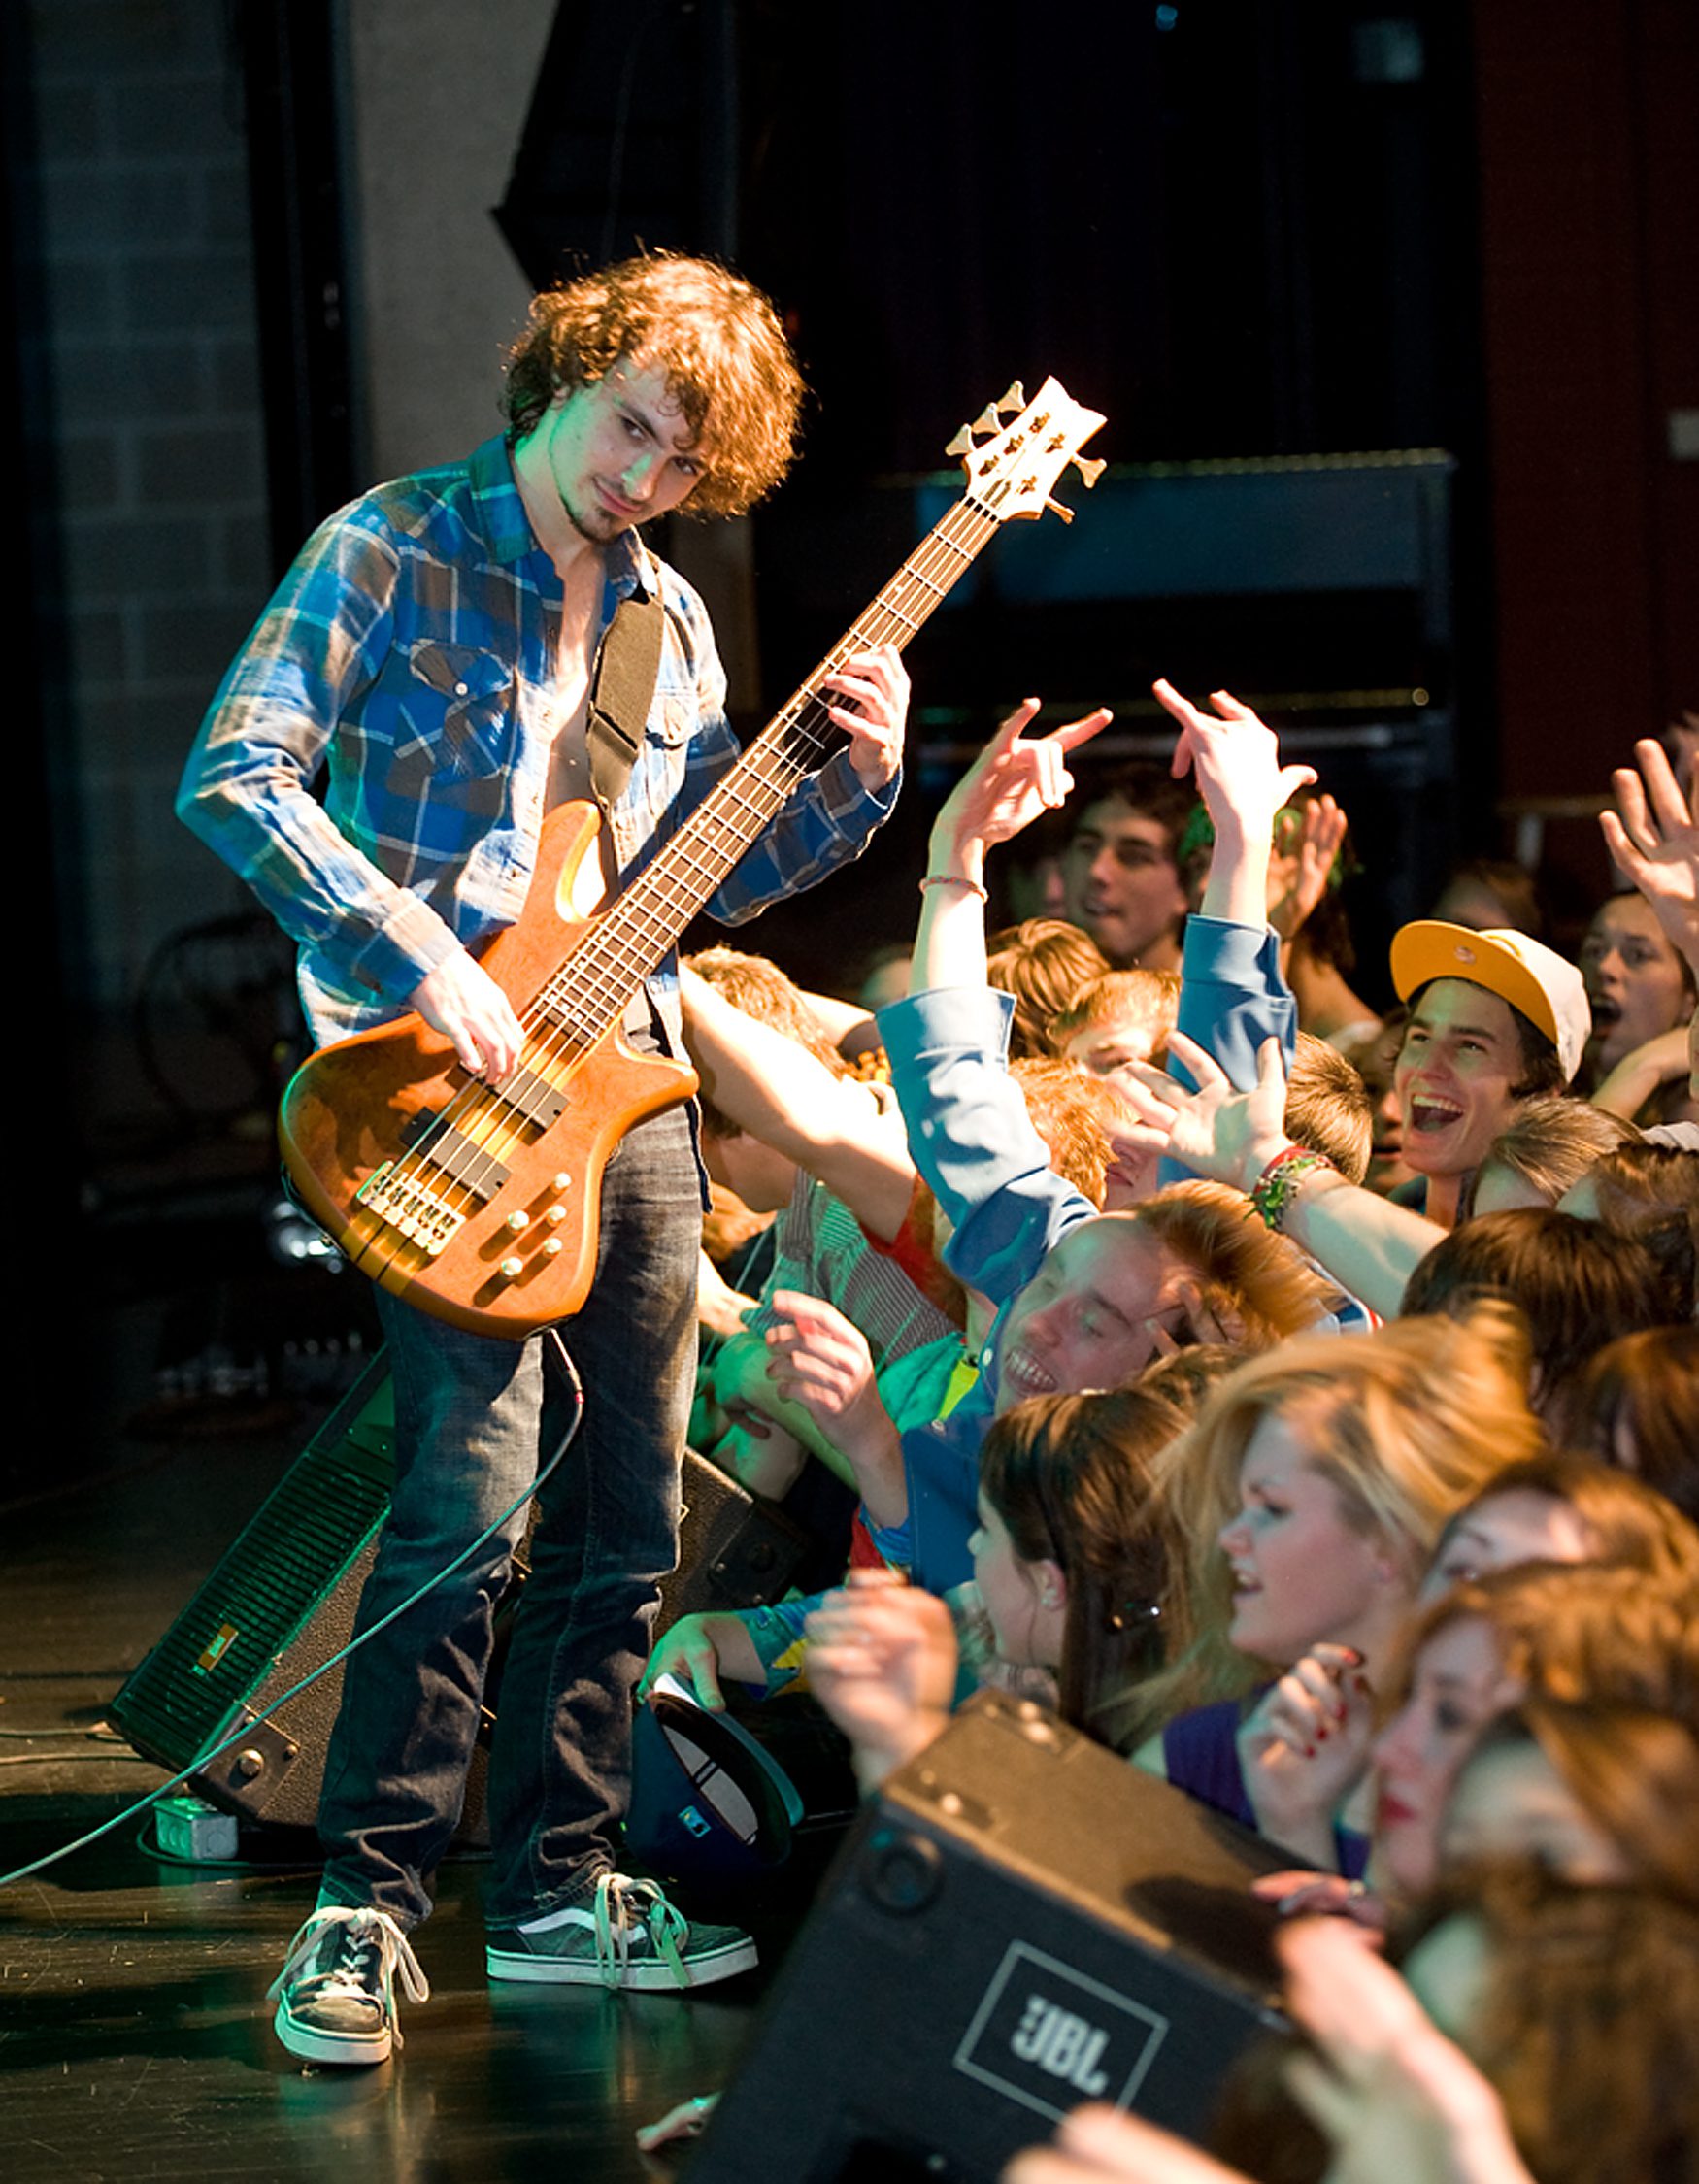 family and children portrait photographer. boy playing bass guitar on stage with fans cheering Youth Photography